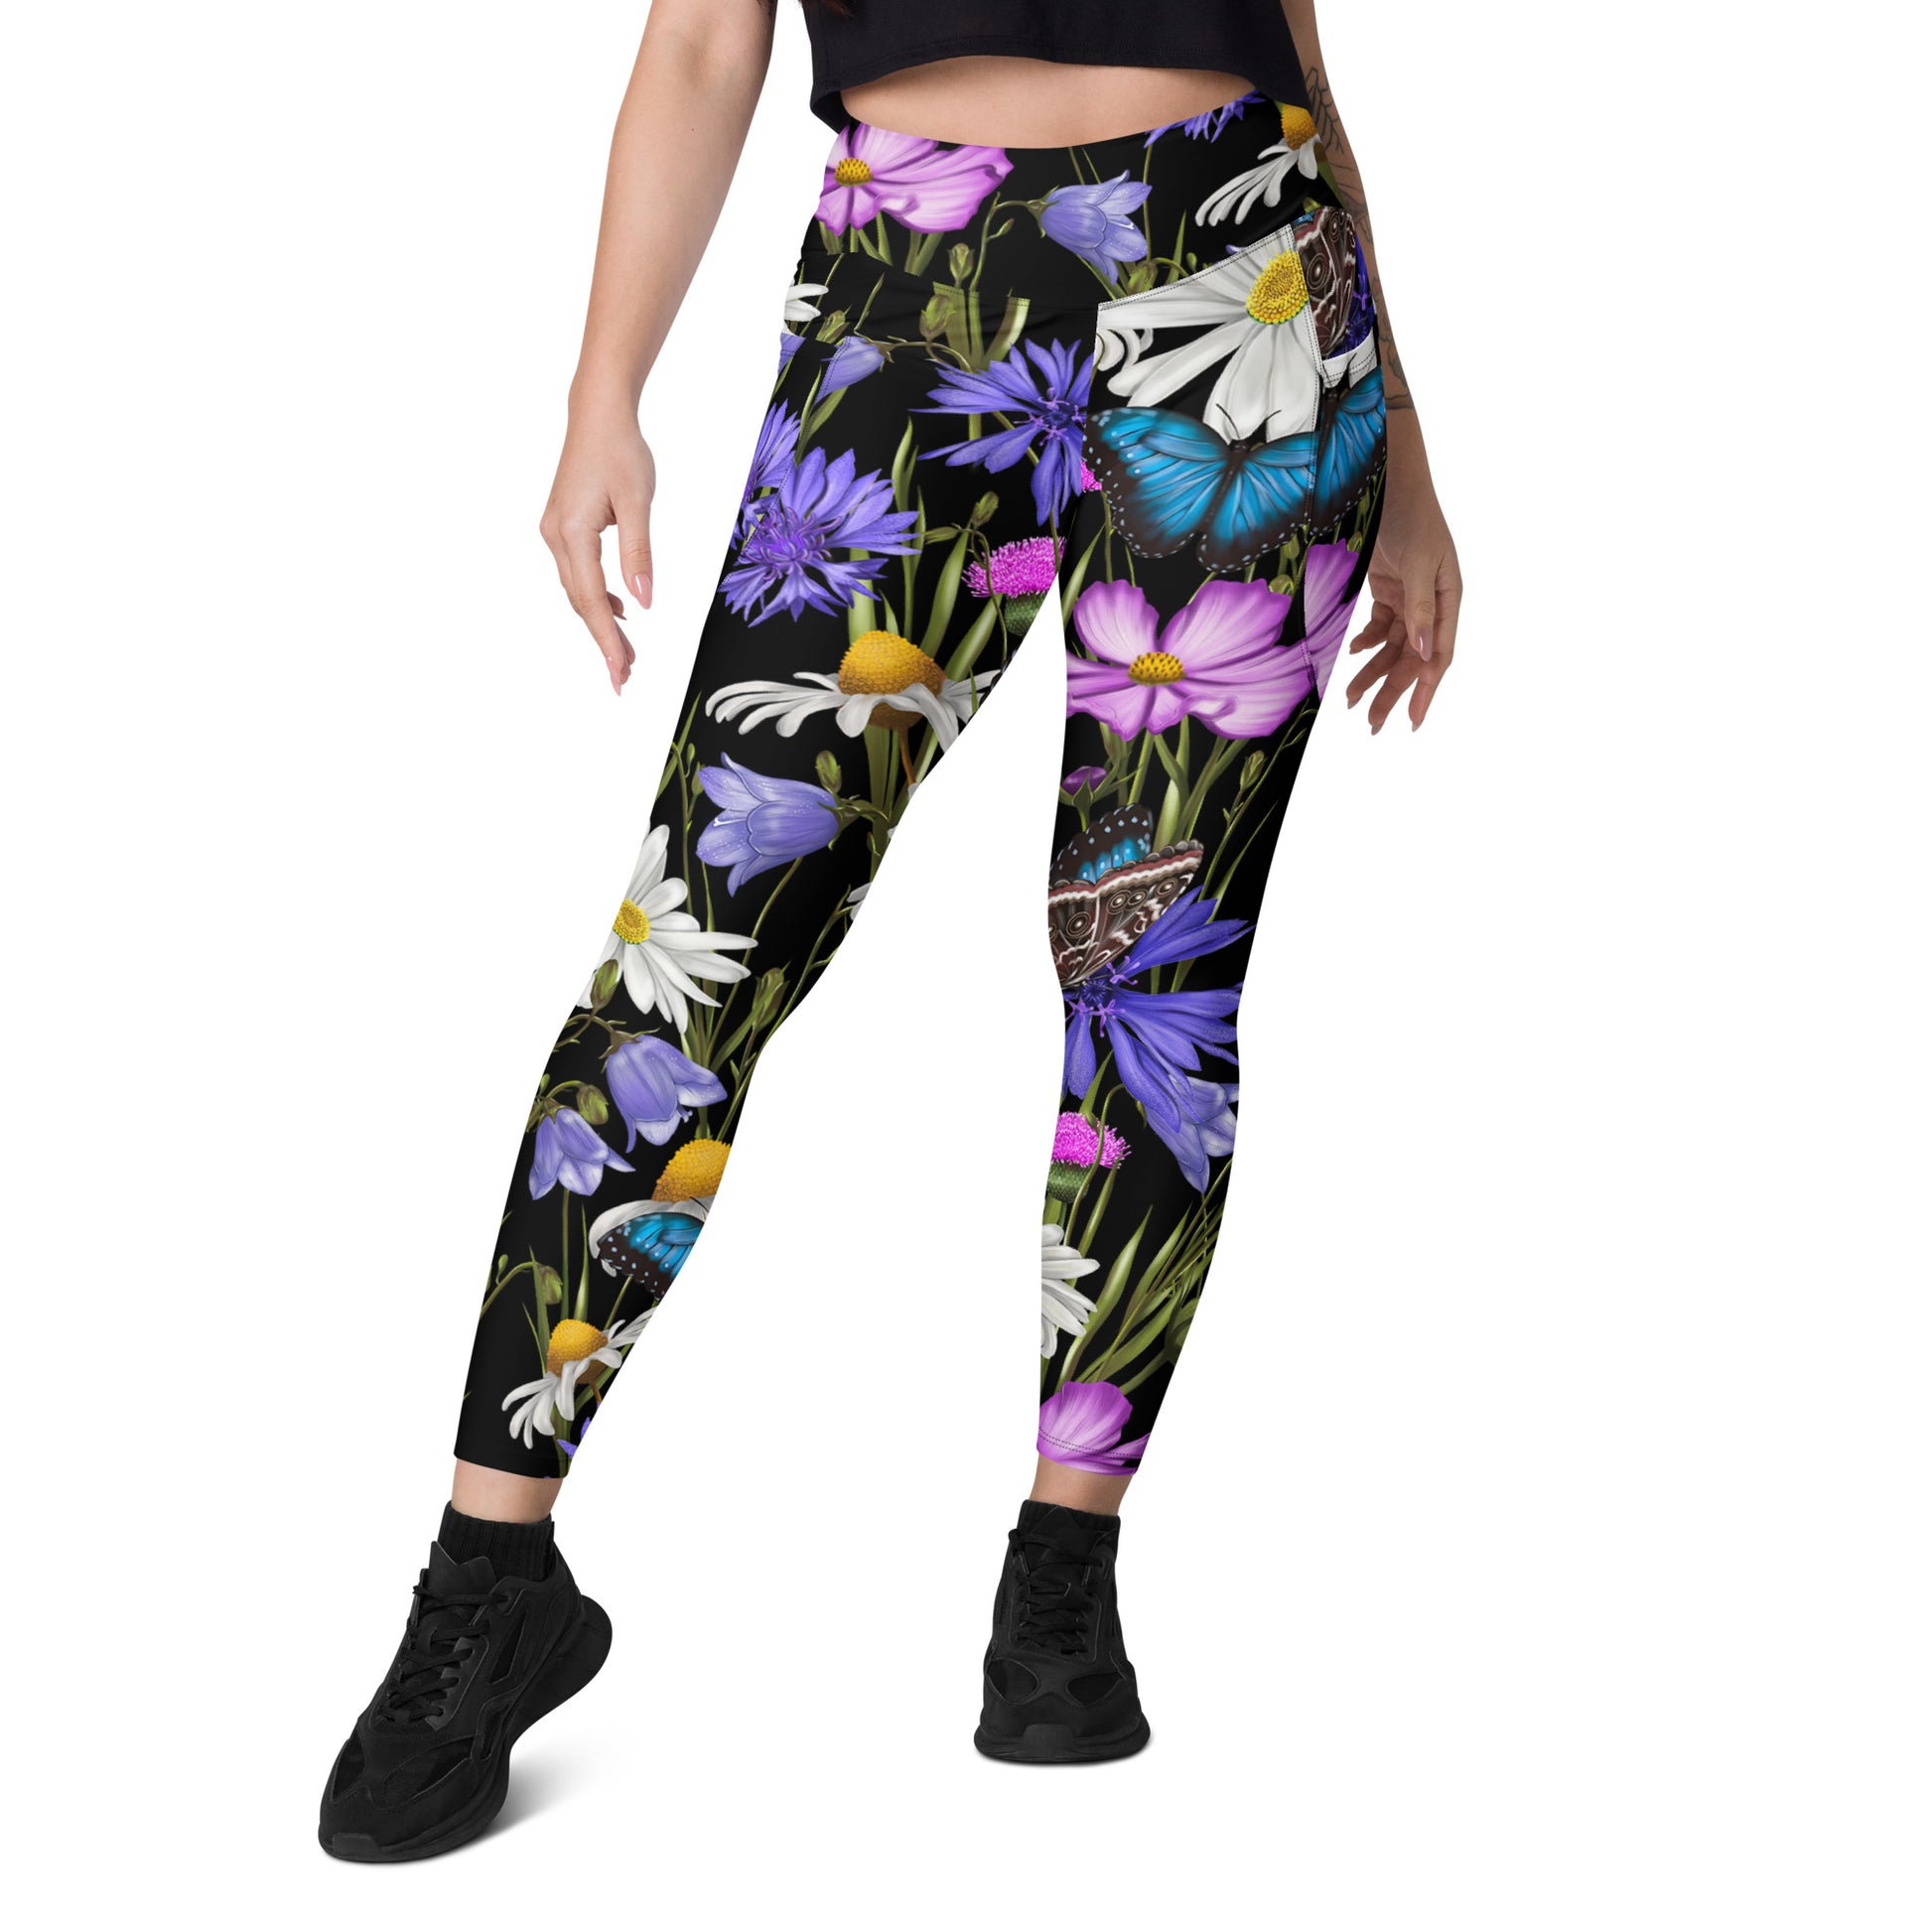 Butterfly Flowers - Leggings with pockets, 2XS - 6XL Leggings With Pockets 2XS - 6XL (US)